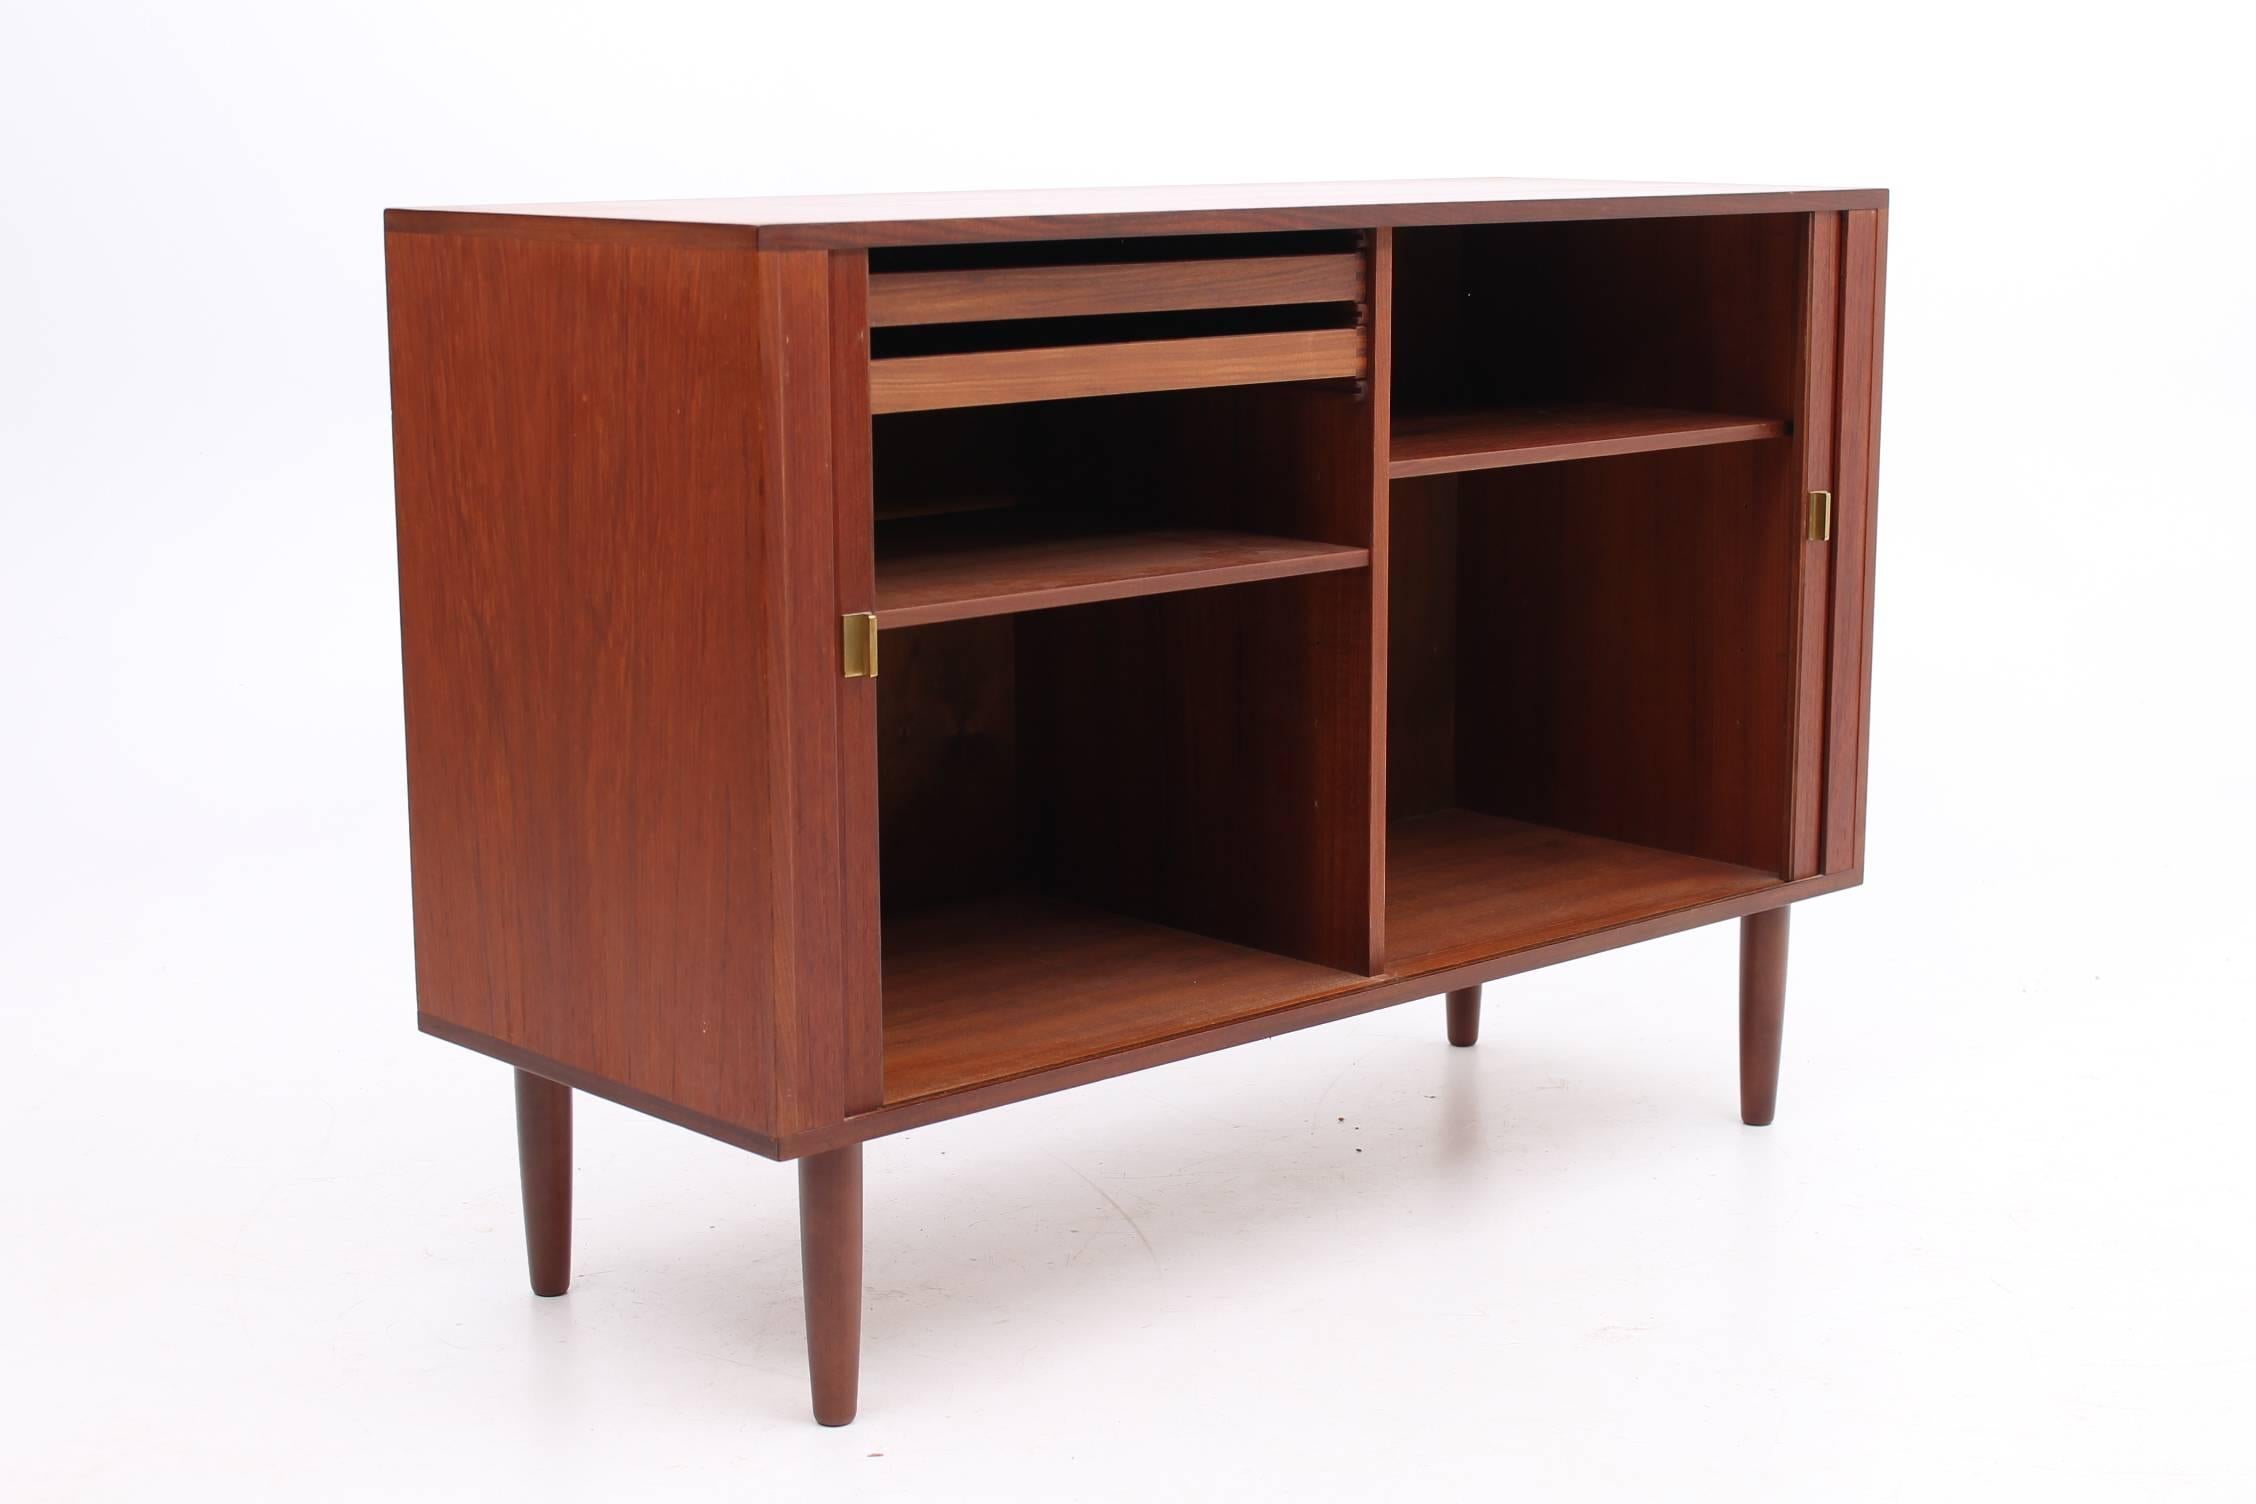 Small sized teak credenza designed by Peter Lovig Nielsen for Hedenstad Furniture. This credenza features brass door pulls to open the roll front drawers. The inside features two organizational slim drawers as well as two fully adjustable shelves.